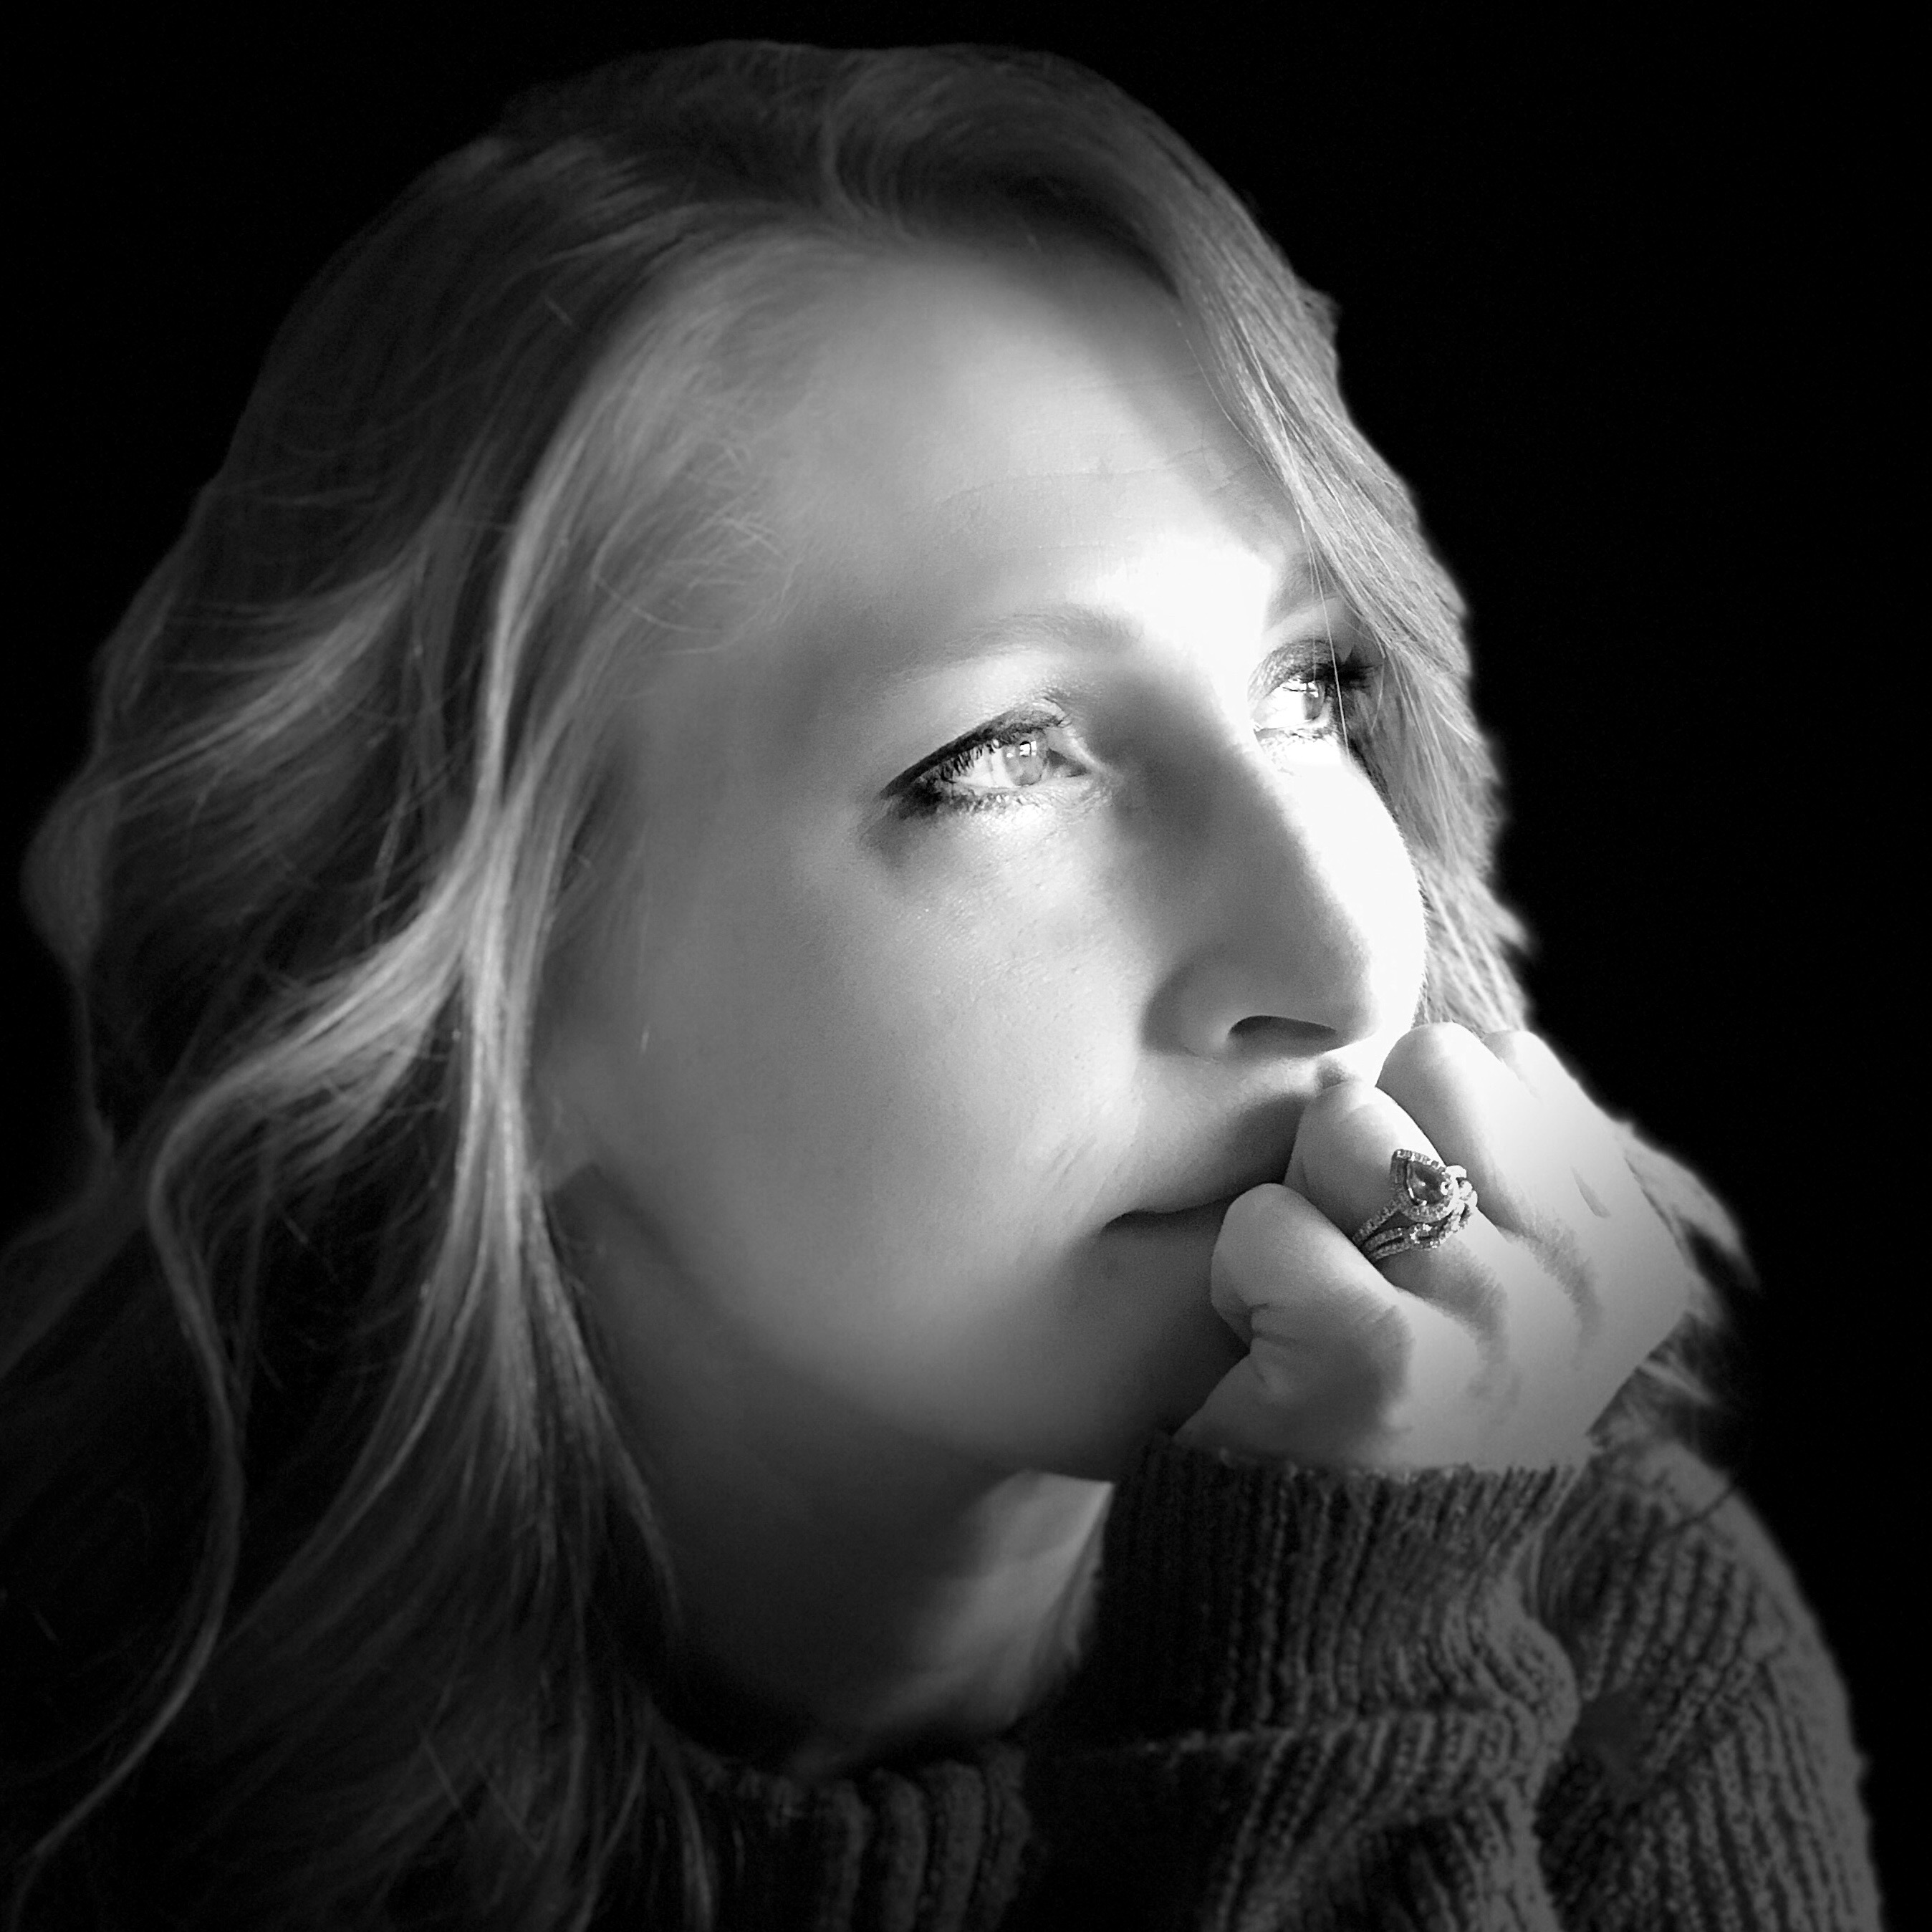 A black and white image of a redhead female looking pensively to the viewer's right